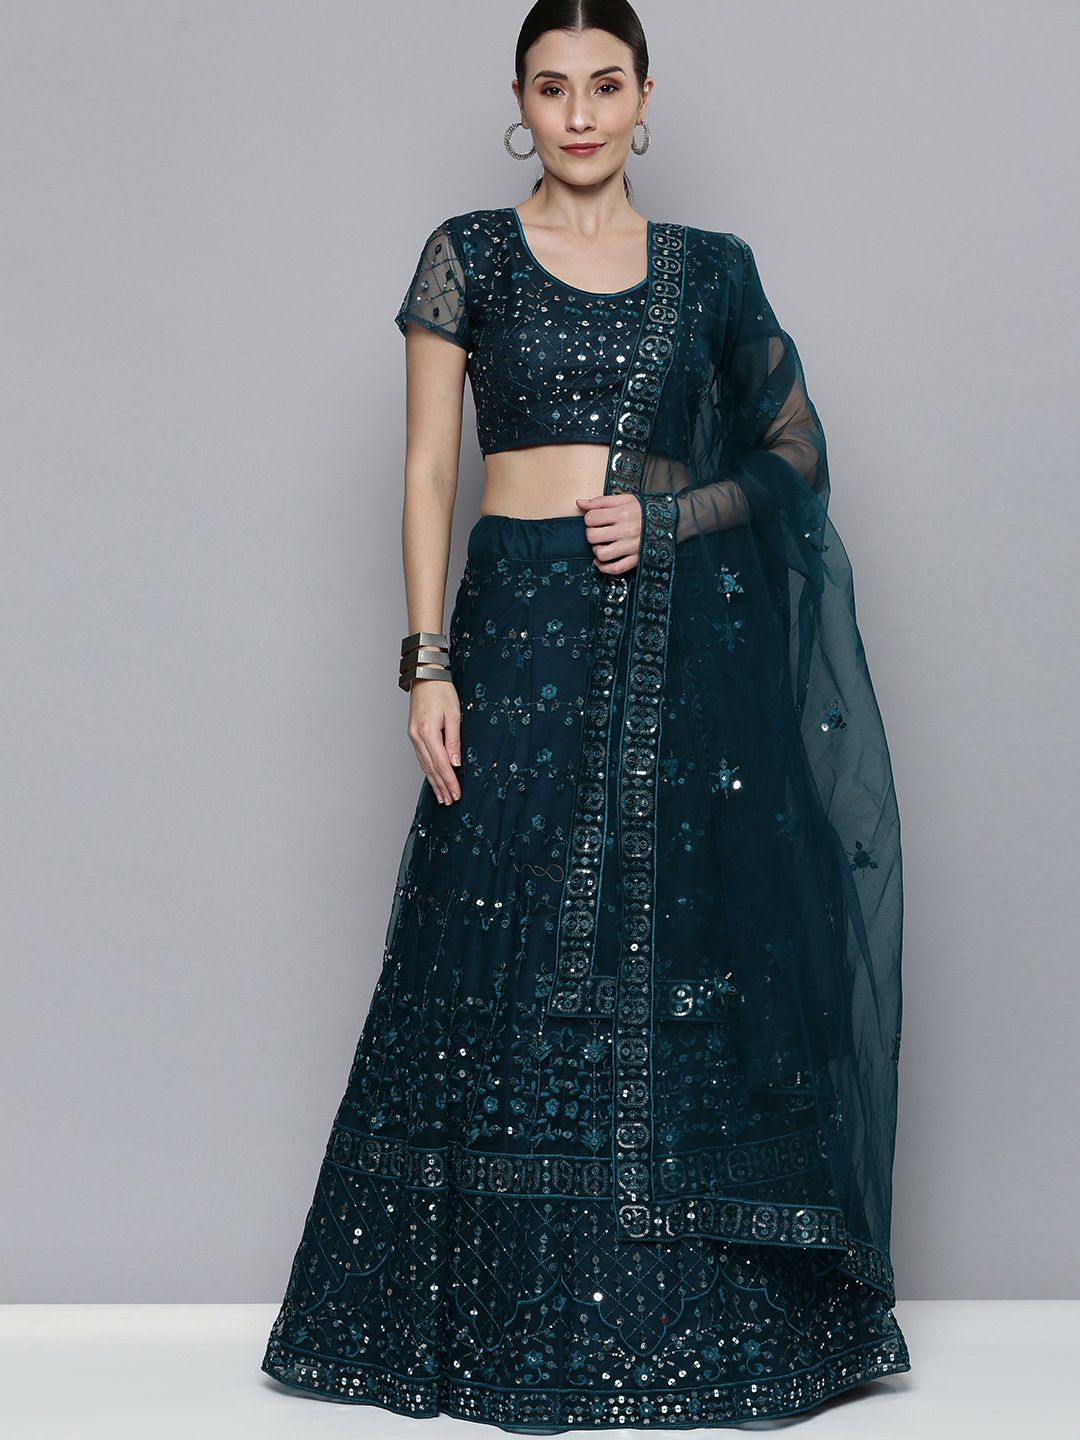 Kvsfab Teal Green Embroidered Semi-Stitched Lehenga with Unstitched Blouse & Dupatta Price in India